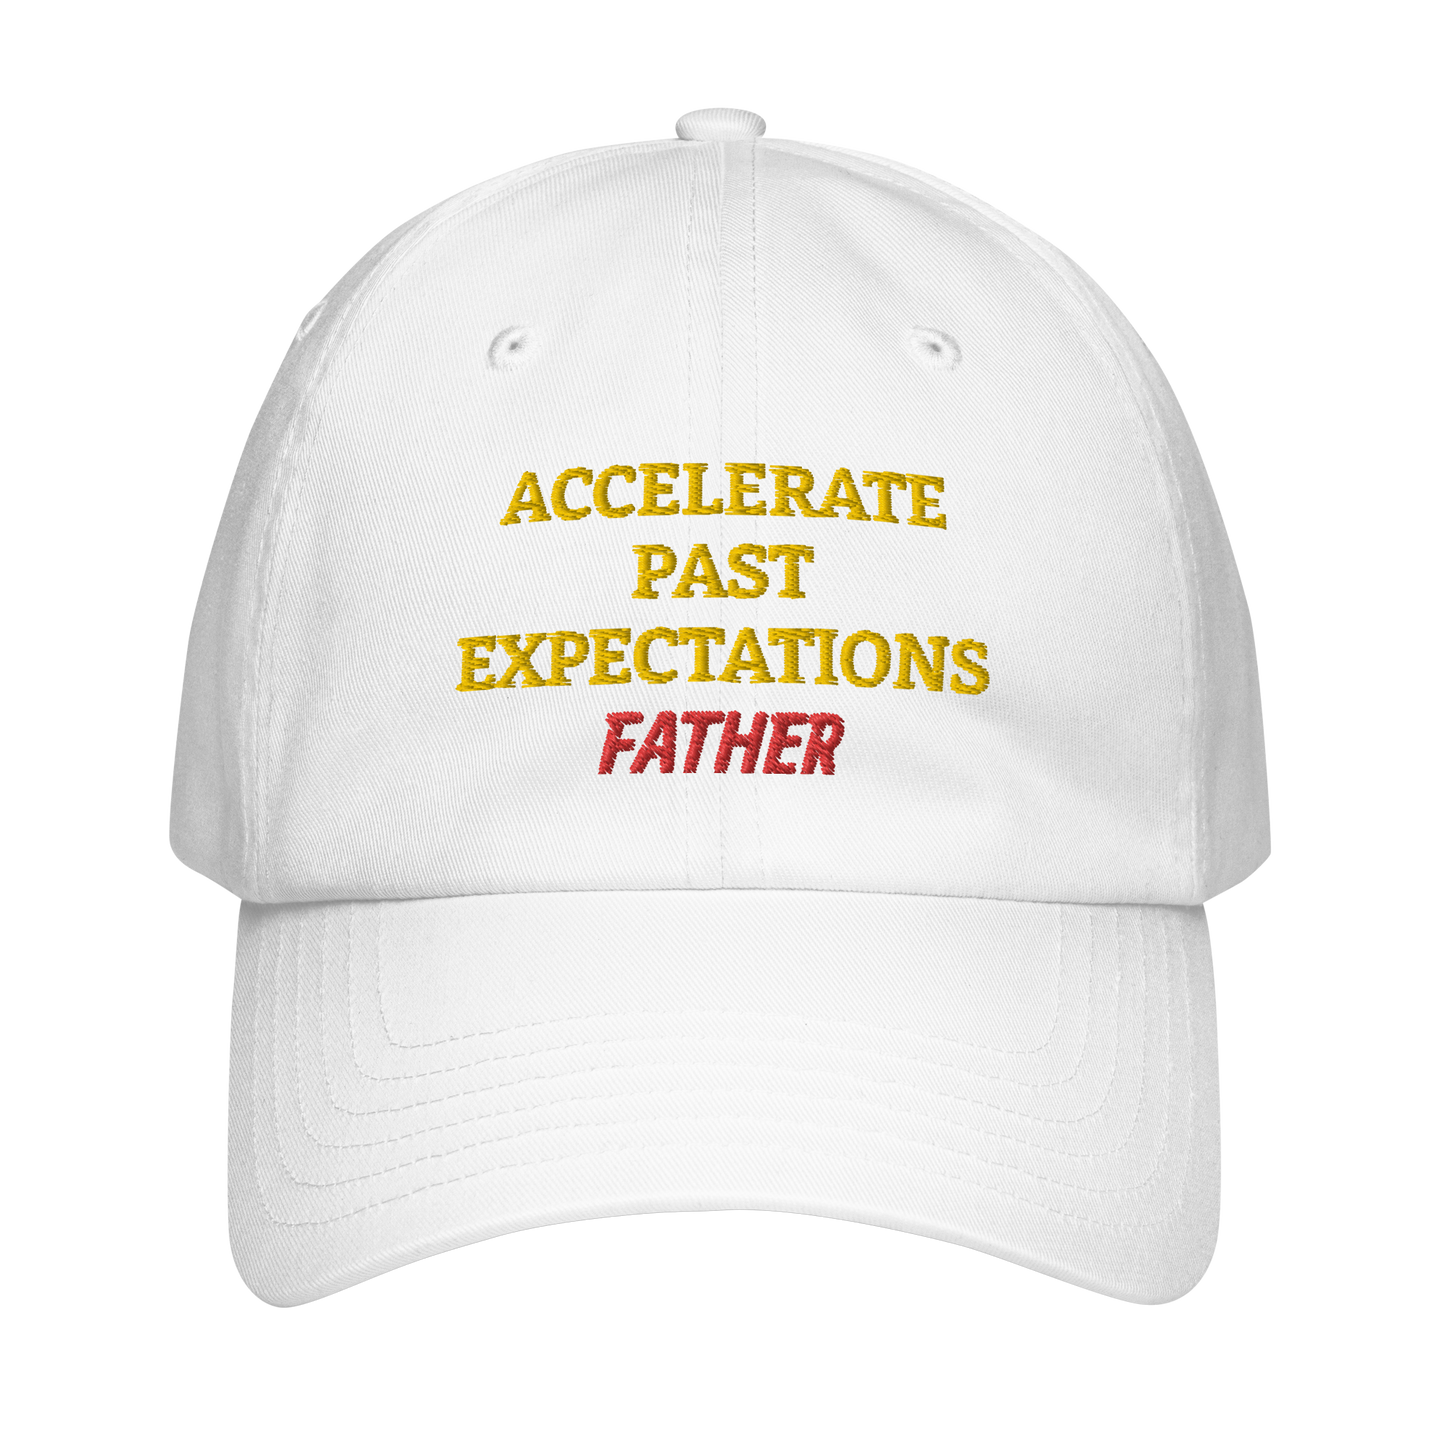 Under Armour® x Apex Life® Father's Day hat